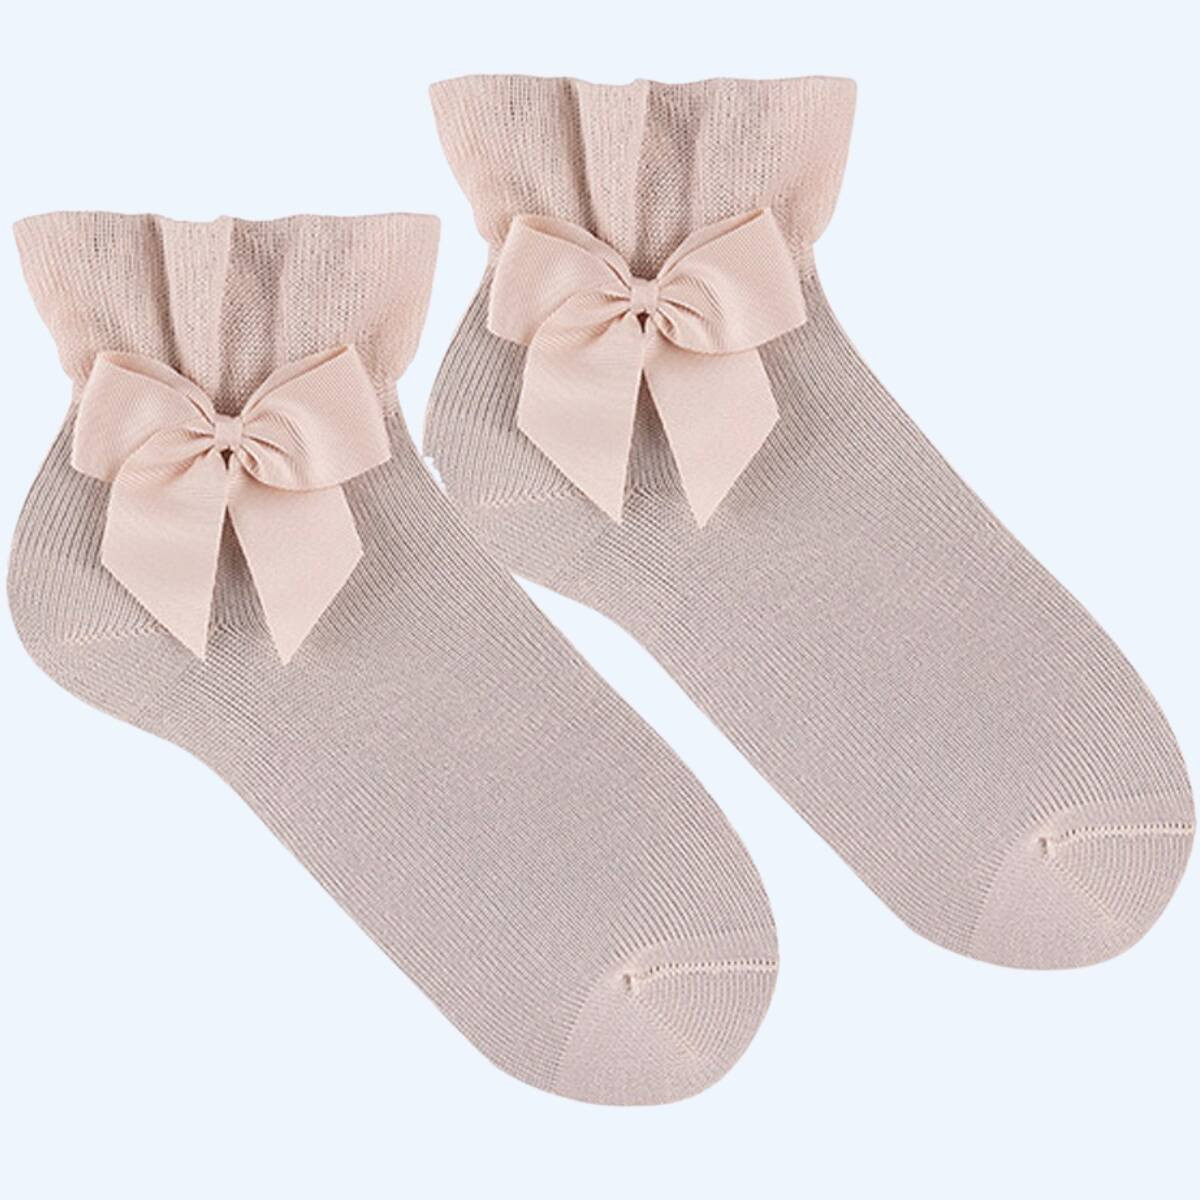 CEREMONY ANKLE SOCKSWITH GROSSGRAIN BOW CONDOR - 6